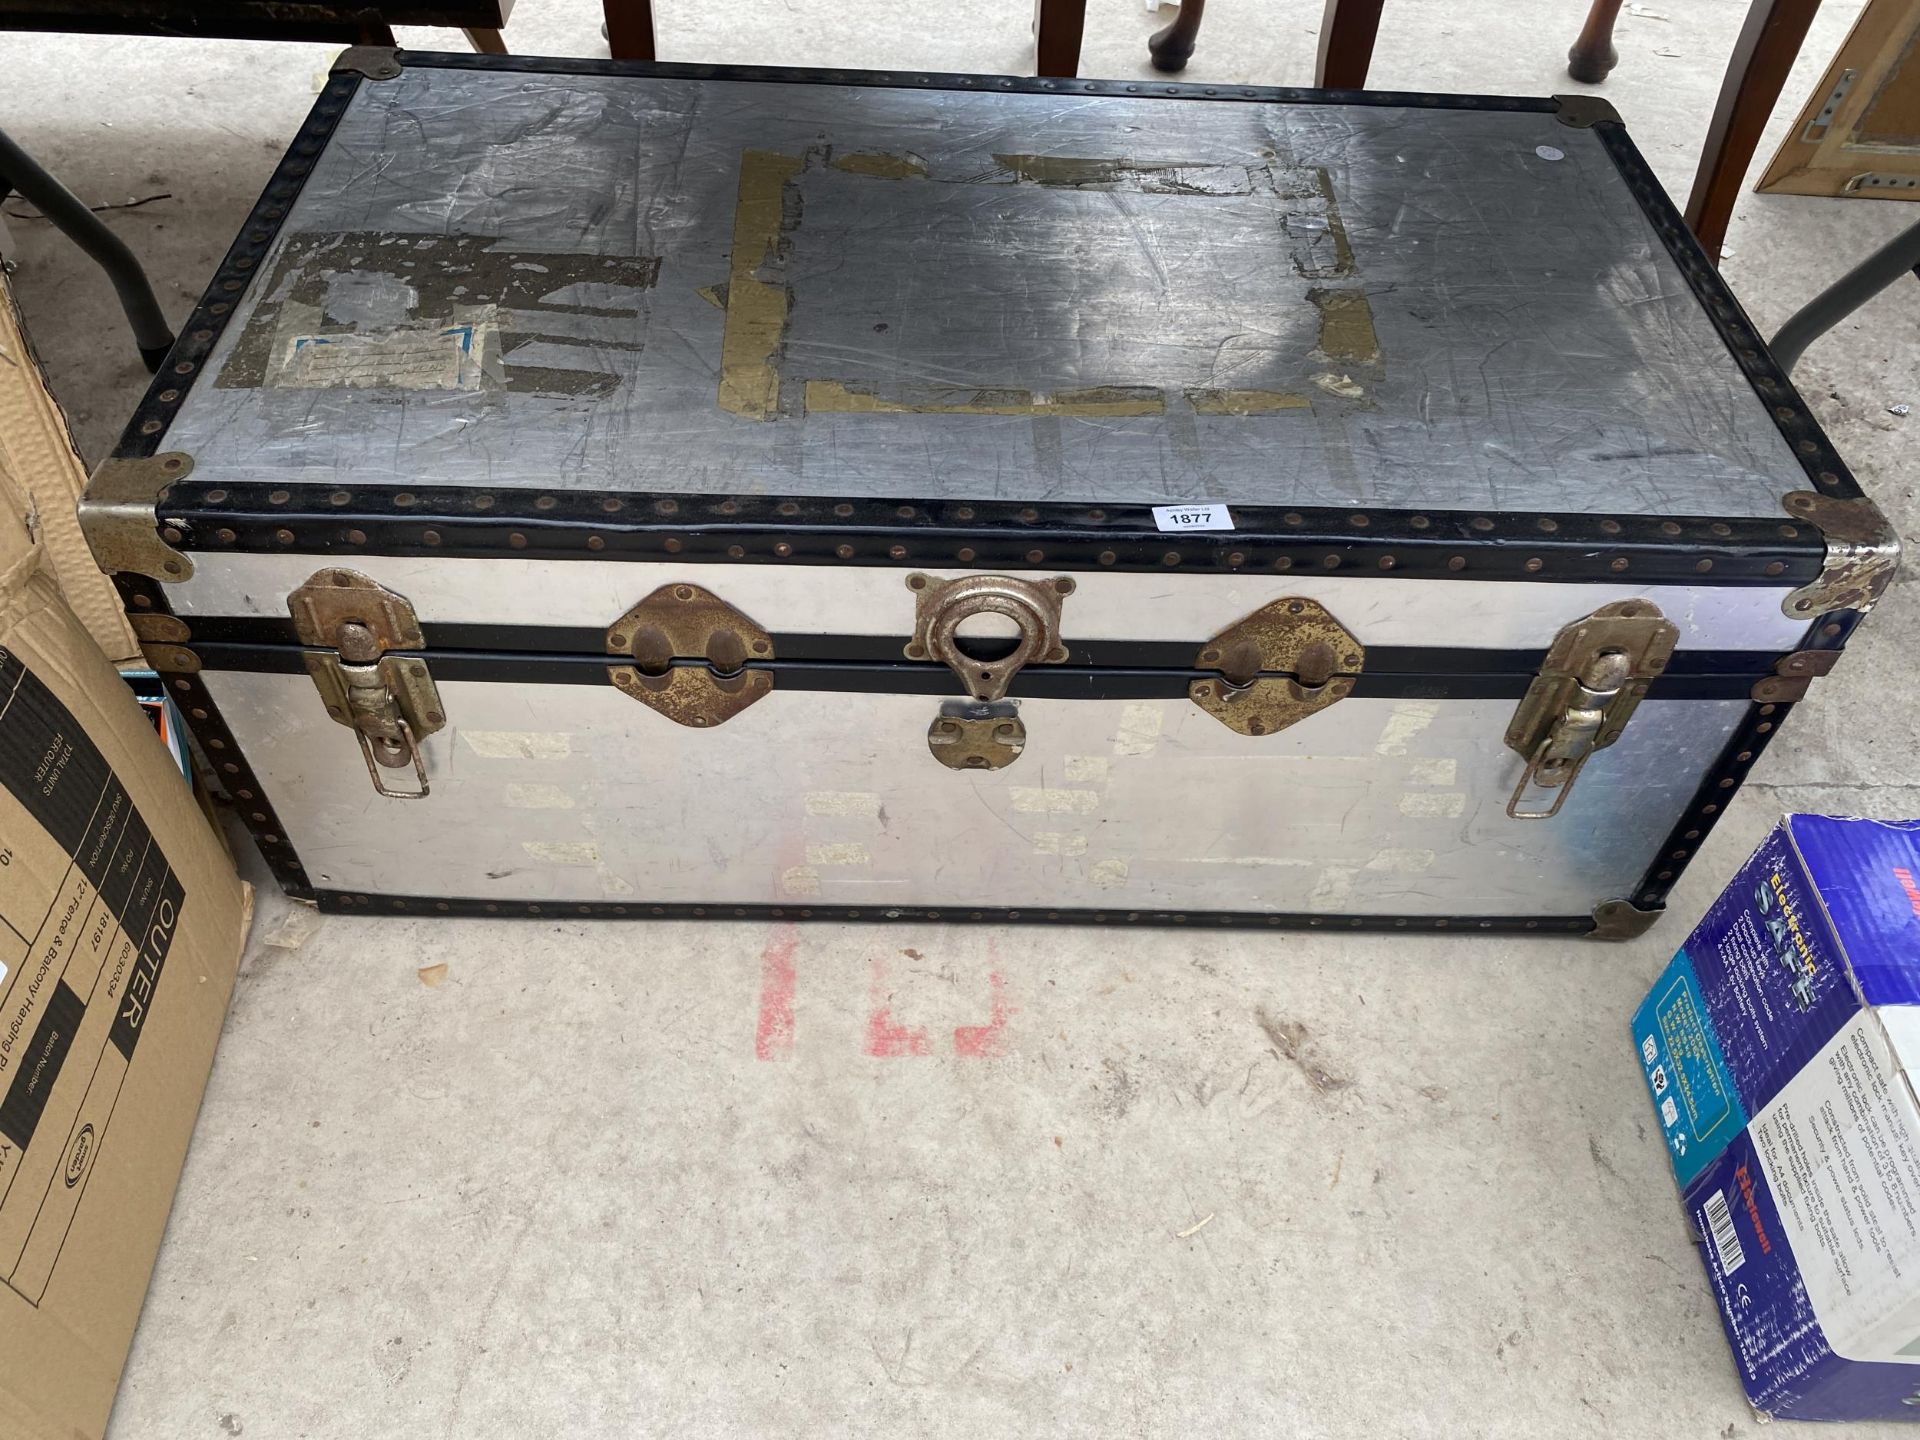 A LARGE HARD CASED TRAVEL TRUNK